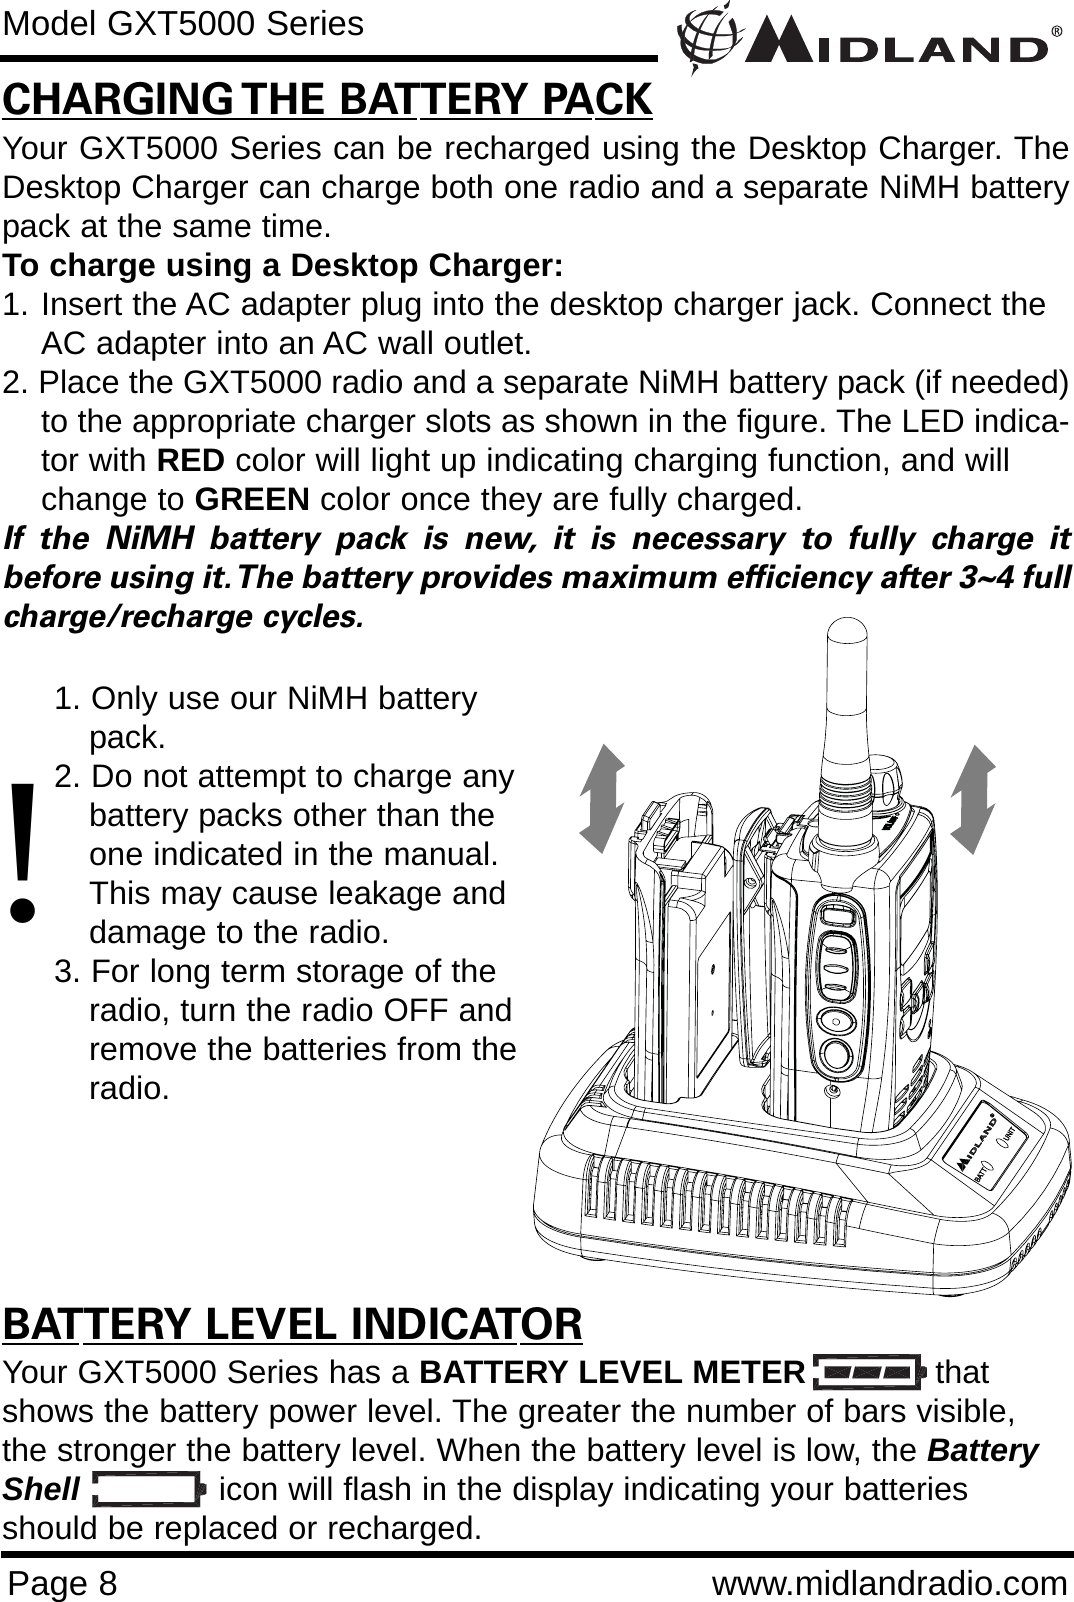 Page 8 www.midlandradio.comCHARGING THE BATTERY PACKYour GXT5000 Series can be recharged using the Desktop Charger. TheDesktop Charger can charge both one radio and a separate NiMH batterypack at the same time. To charge using a Desktop Charger:1. Insert the AC adapter plug into the desktop charger jack. Connect the AC adapter into an AC wall outlet.2. Place the GXT5000 radio and a separate NiMH battery pack (if needed)to the appropriate charger slots as shown in the figure. The LED indica-tor with RED color will light up indicating charging function, and will change to GREEN color once they are fully charged.If the NiMH battery pack is new, it is necessary to fully charge itbefore using it.The battery provides maximum efficiency after 3~4 fullcharge/recharge cycles.BATTERY LEVEL INDICATORYour GXT5000 Series has a BATTERY LEVEL METER thatshows the battery power level. The greater the number of bars visible,the stronger the battery level. When the battery level is low, the BatteryShell icon will flash in the display indicating your batteriesshould be replaced or recharged.Model GXT5000 Series!1. Only use our NiMH battery pack.2. Do not attempt to charge any battery packs other than the one indicated in the manual. This may cause leakage and damage to the radio.3. For long term storage of the radio, turn the radio OFF and remove the batteries from the radio.